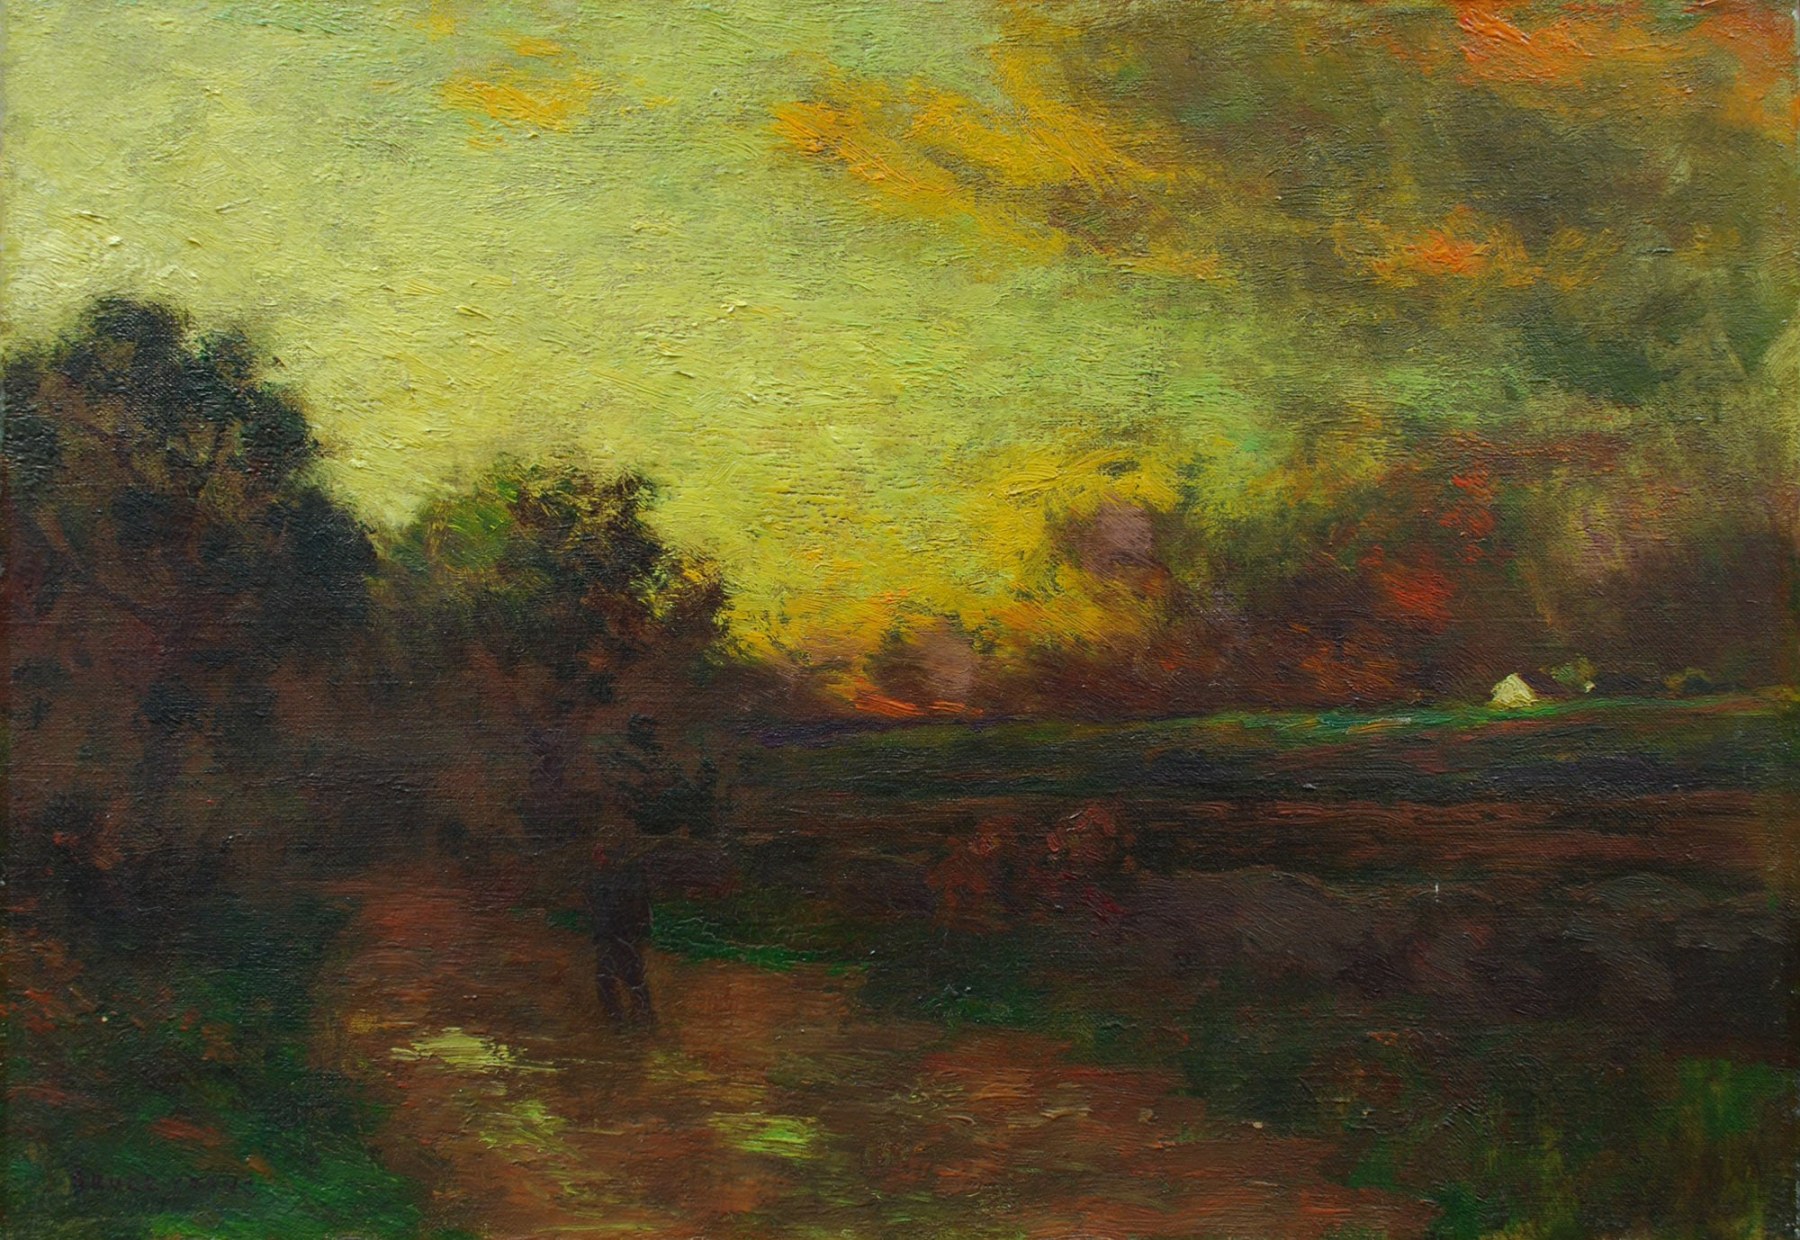 BRUCE CRANE (1857-1937), End of Day